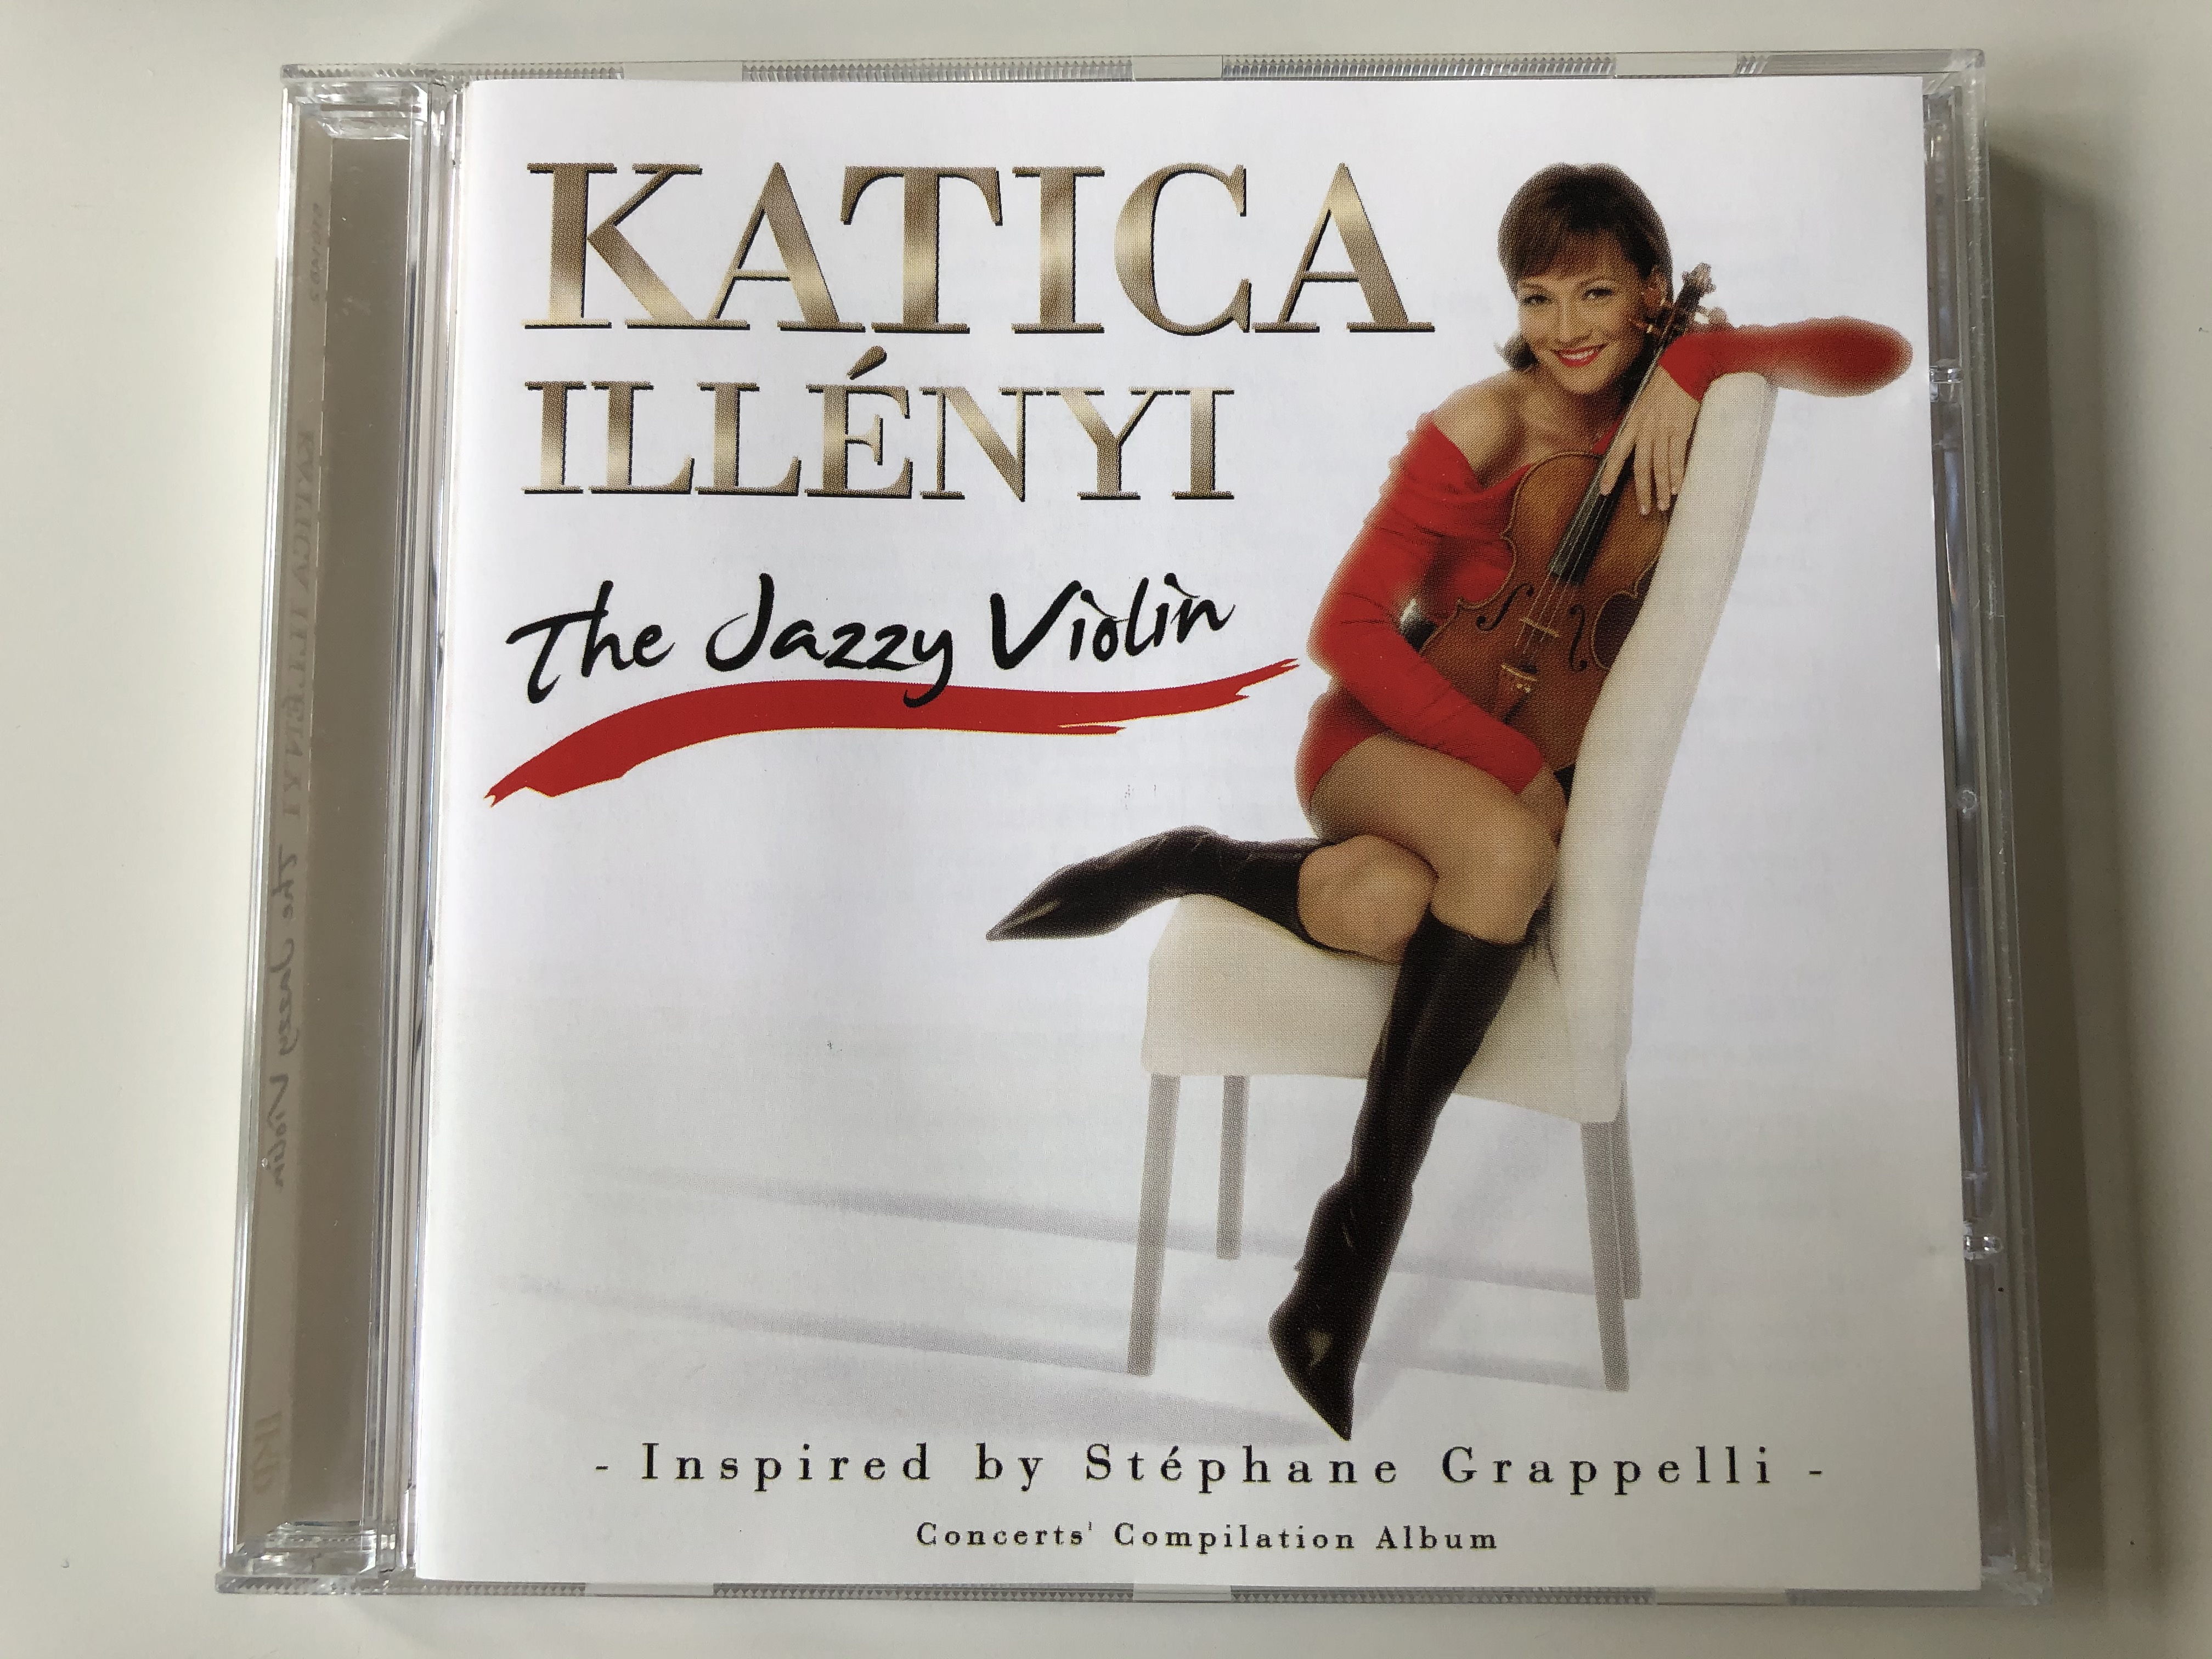 katica-ill-ny-the-jazzy-violin-inspired-by-stephane-grappelli-concerts-compilation-album-ikp-music-audio-cd-2007-510146-2-1-.jpg